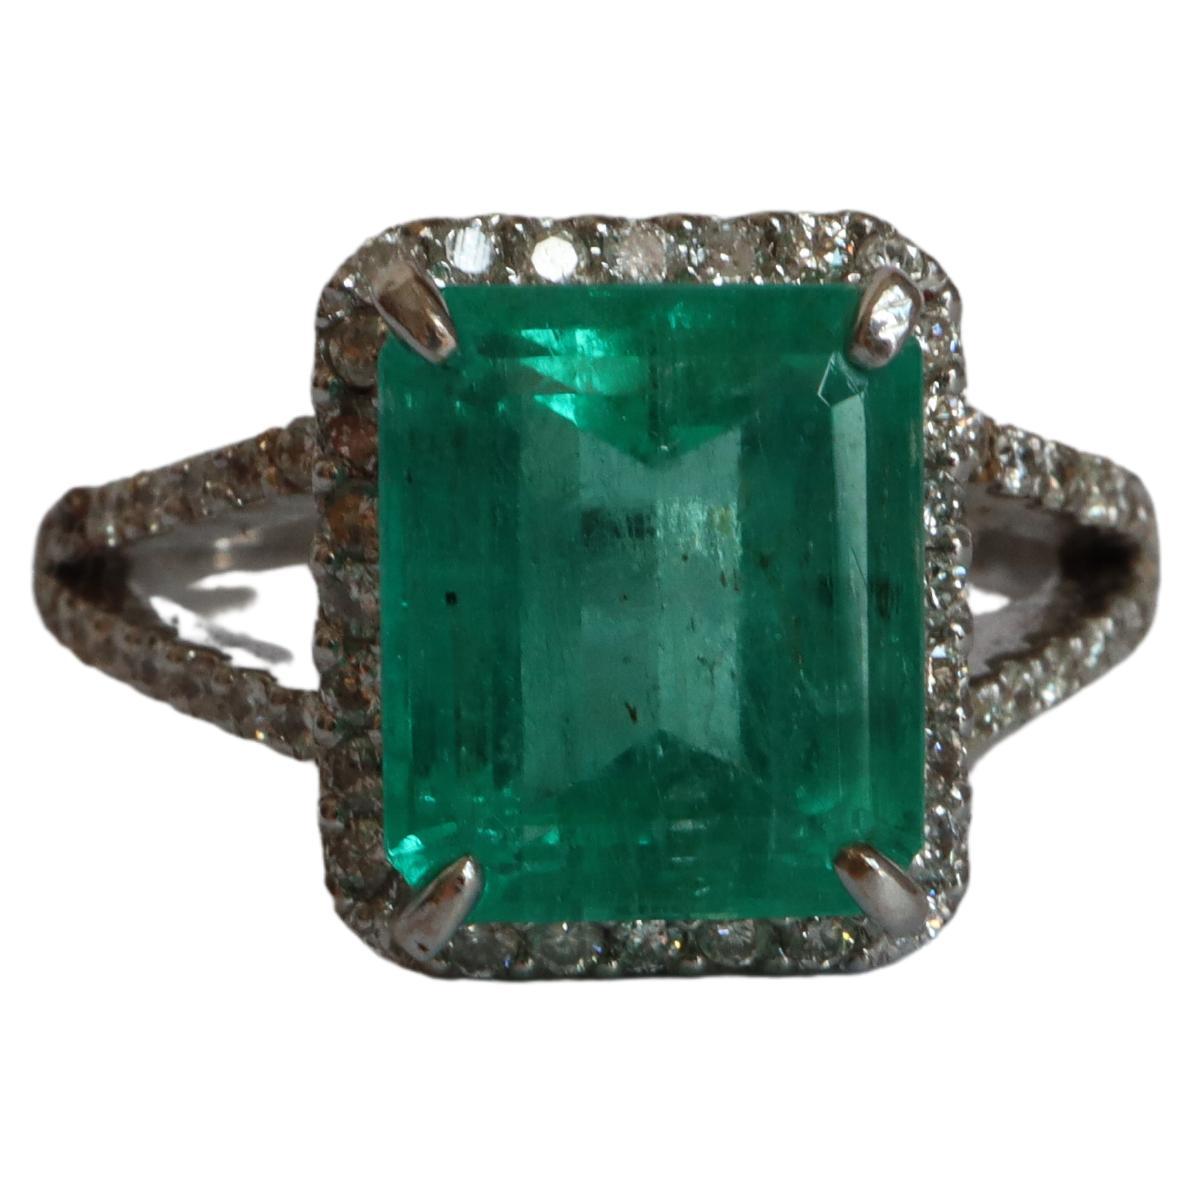 GIA Certified 3.82Ct Colombian Emerald Halo Ring in Platinum900